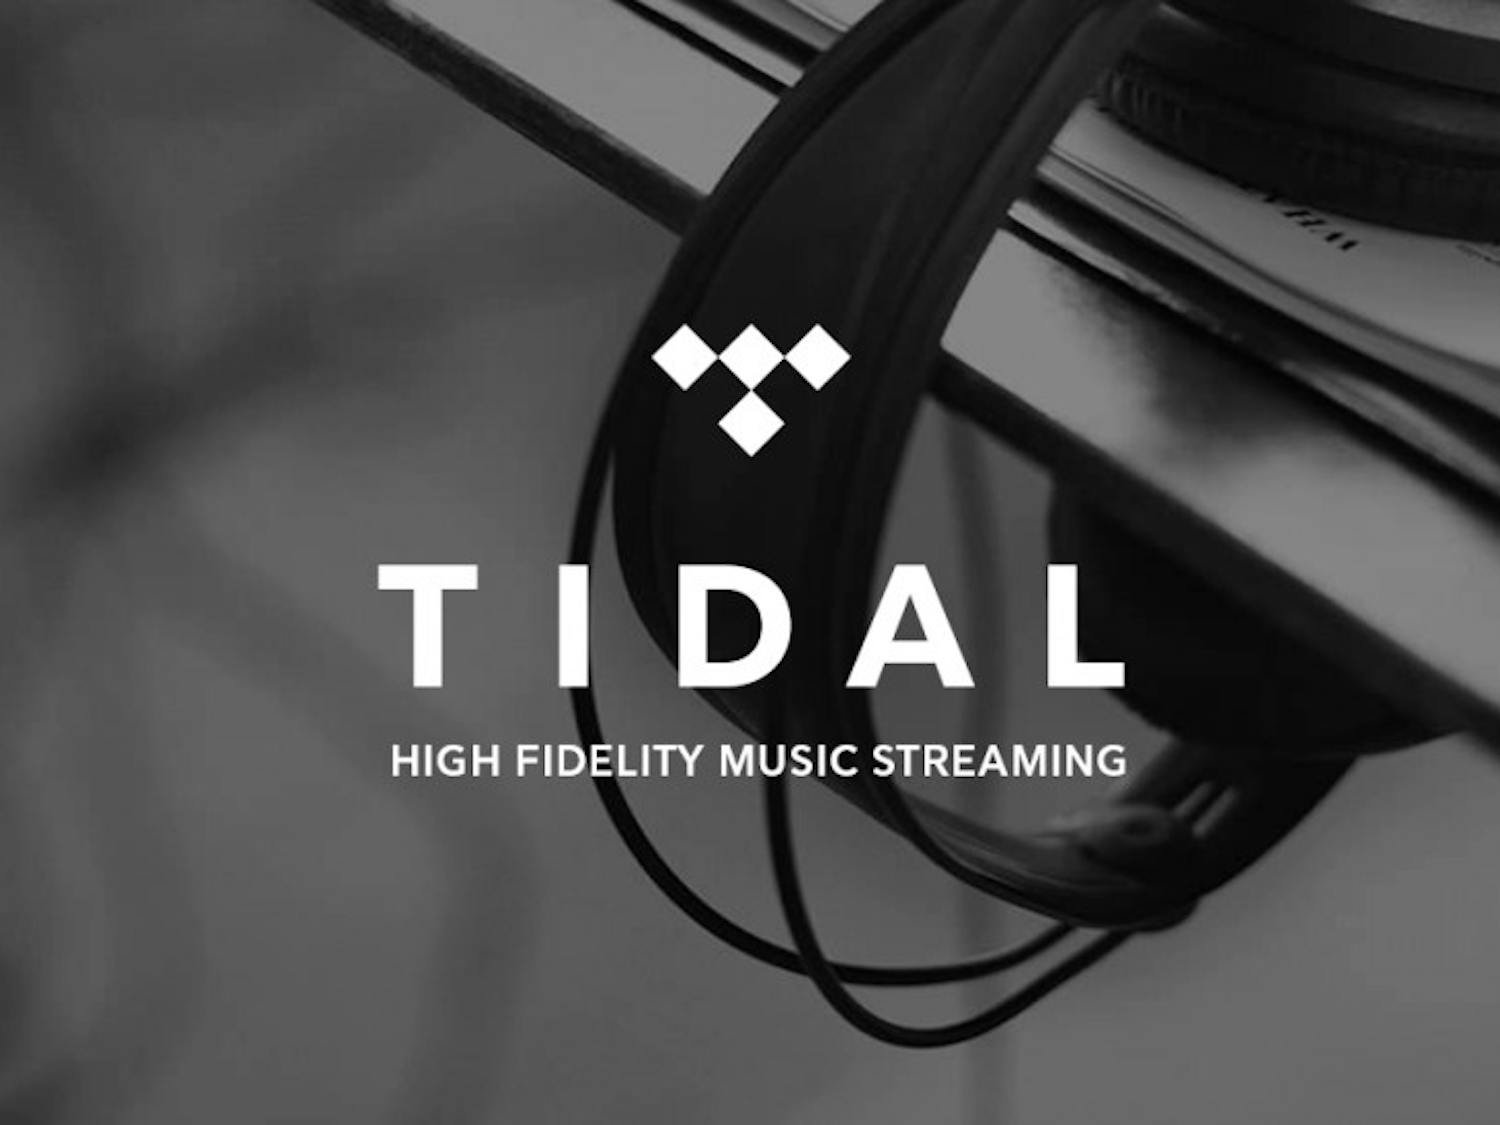 TIDAL is a new addition to the music streaming industry. Much like Spotify, Pandora and other services, it offers music and playlists based on moods, activities and genres.